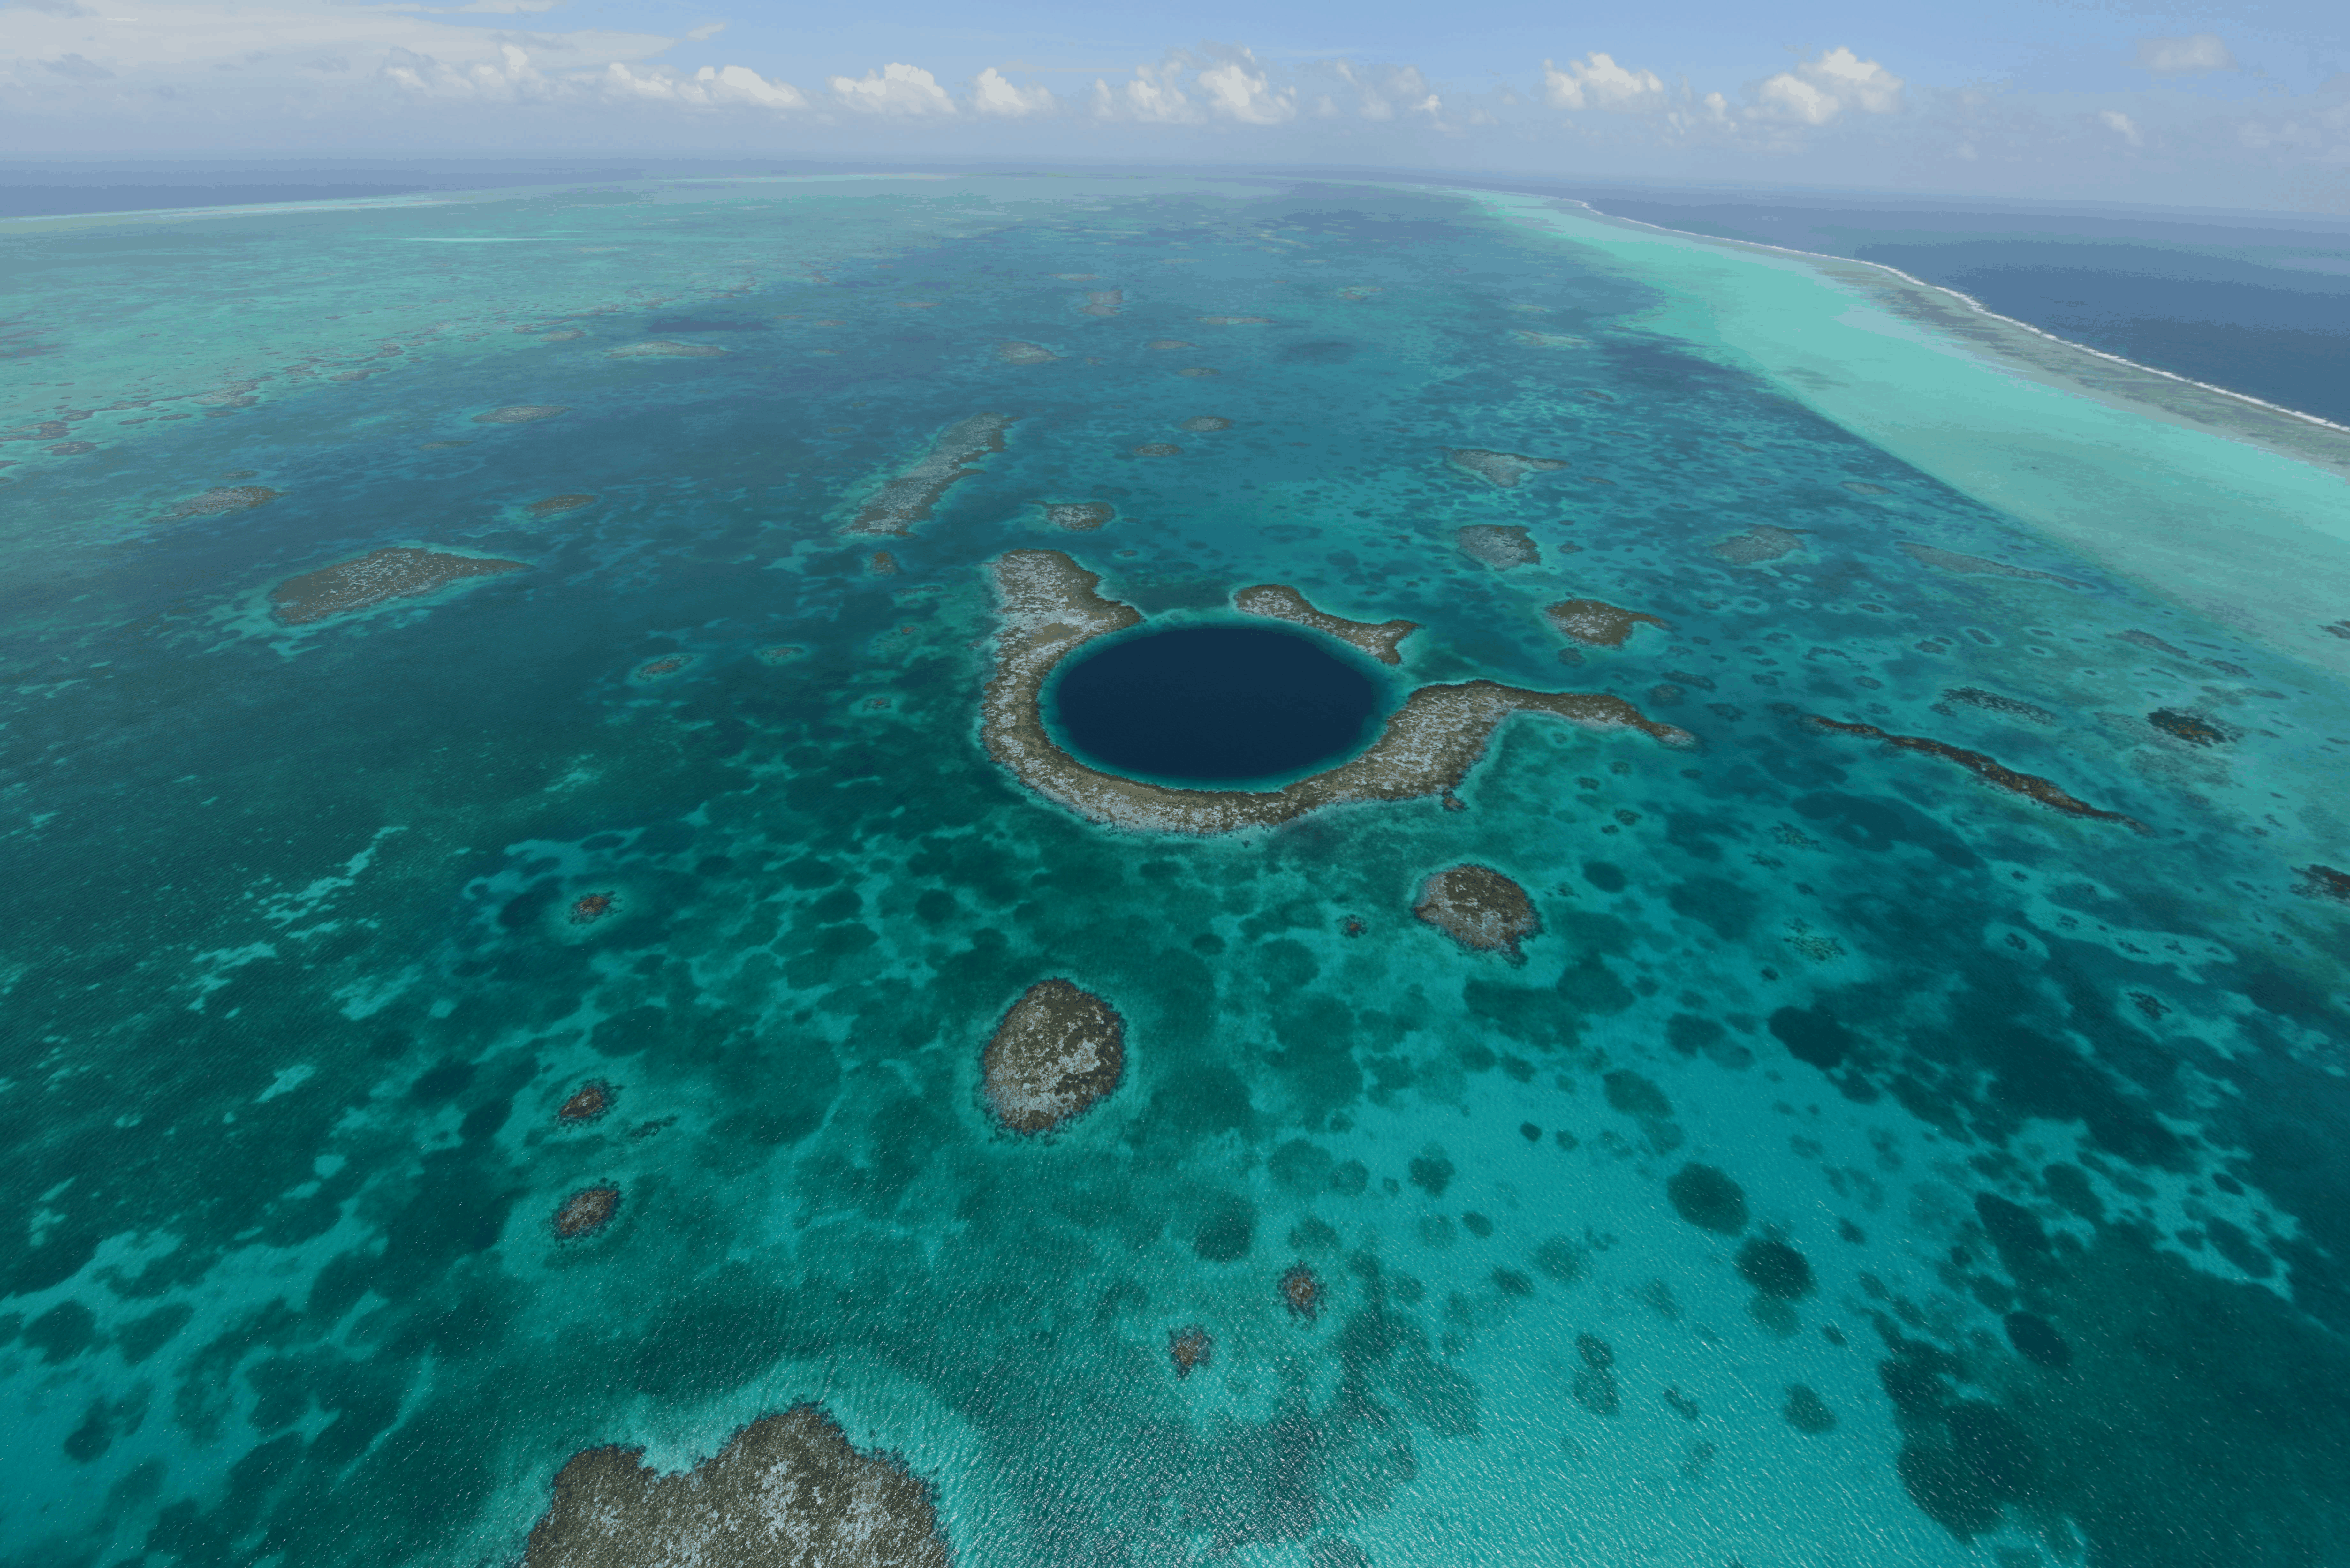 This undated image provided by The Belize Tourist Board shows an aerial view of the Great Blue Hole, a popular diving site that is part of Belize’s barrier reef. The Blue Hole is 1,000 feet (300 meter ...